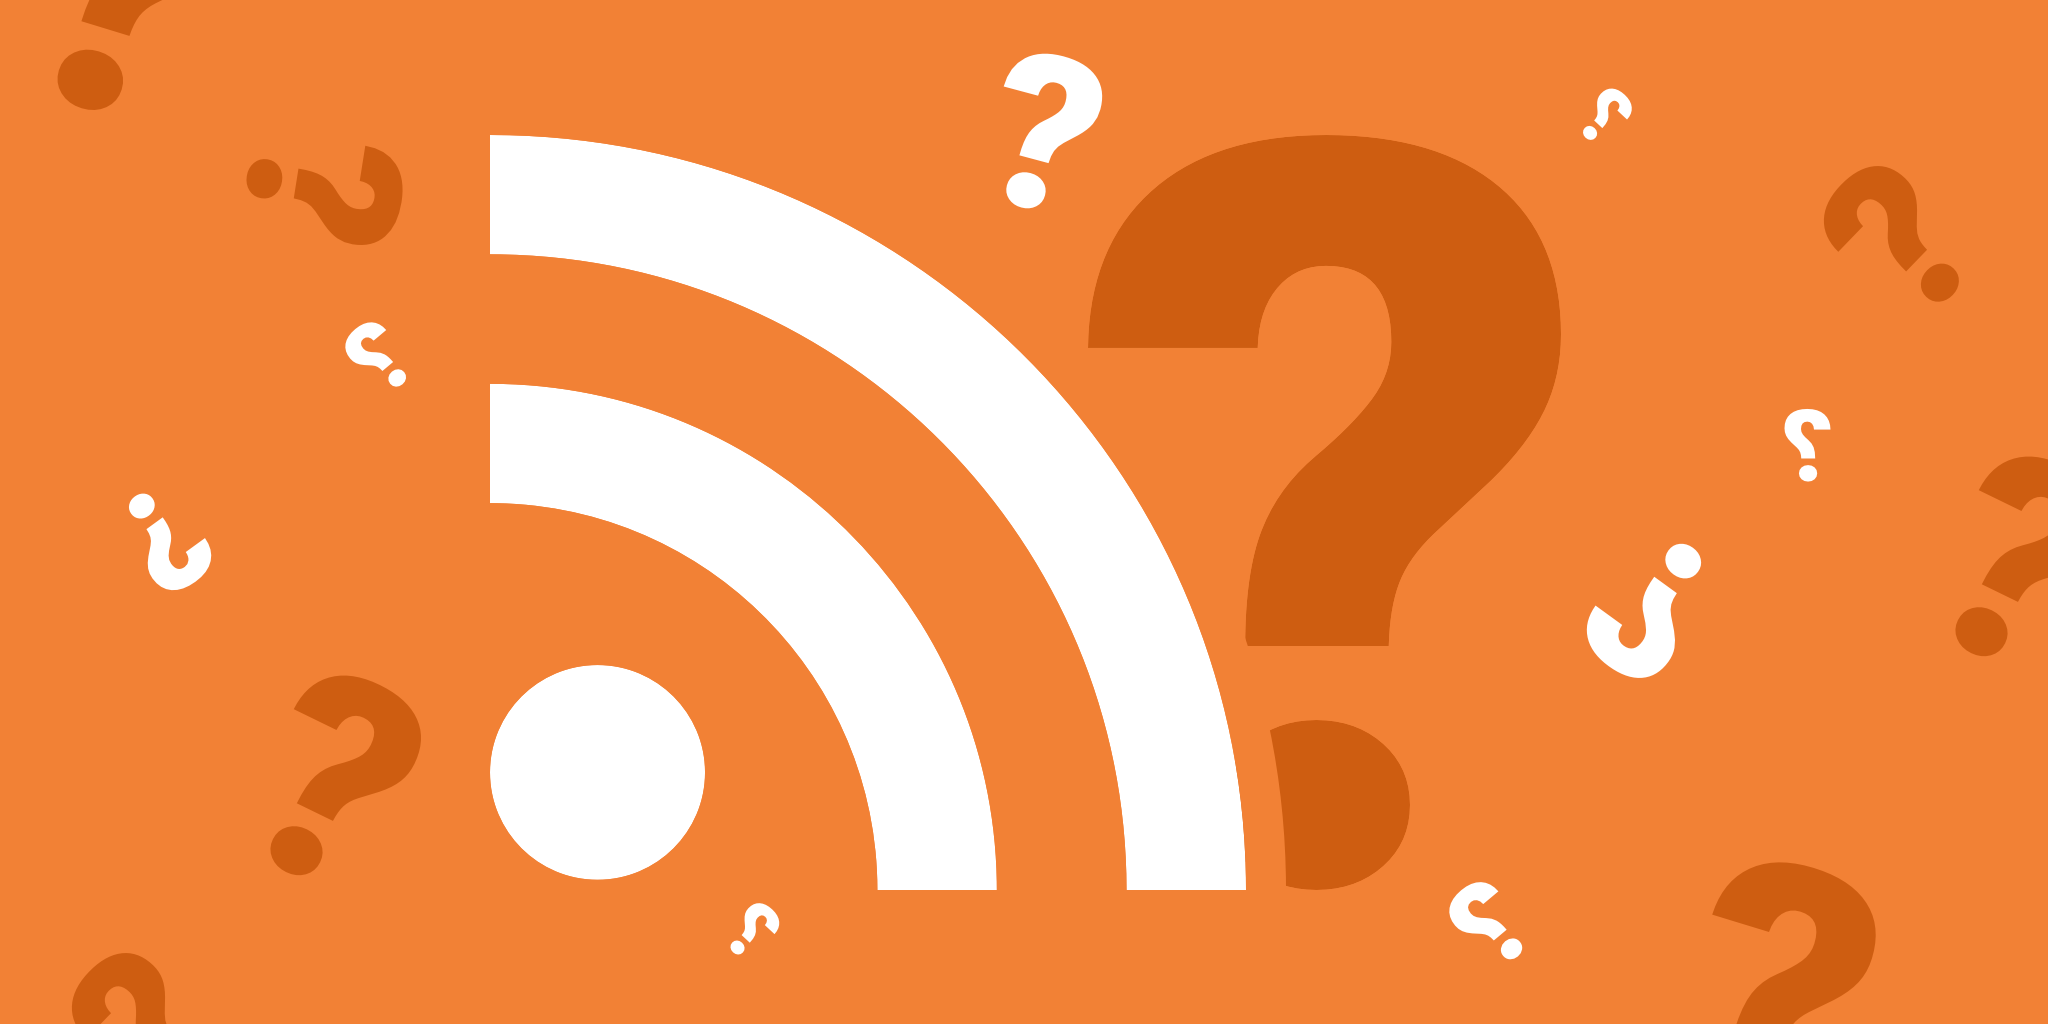 How to use RSS feed subscriptions and filters for job hunting? | Inoreader